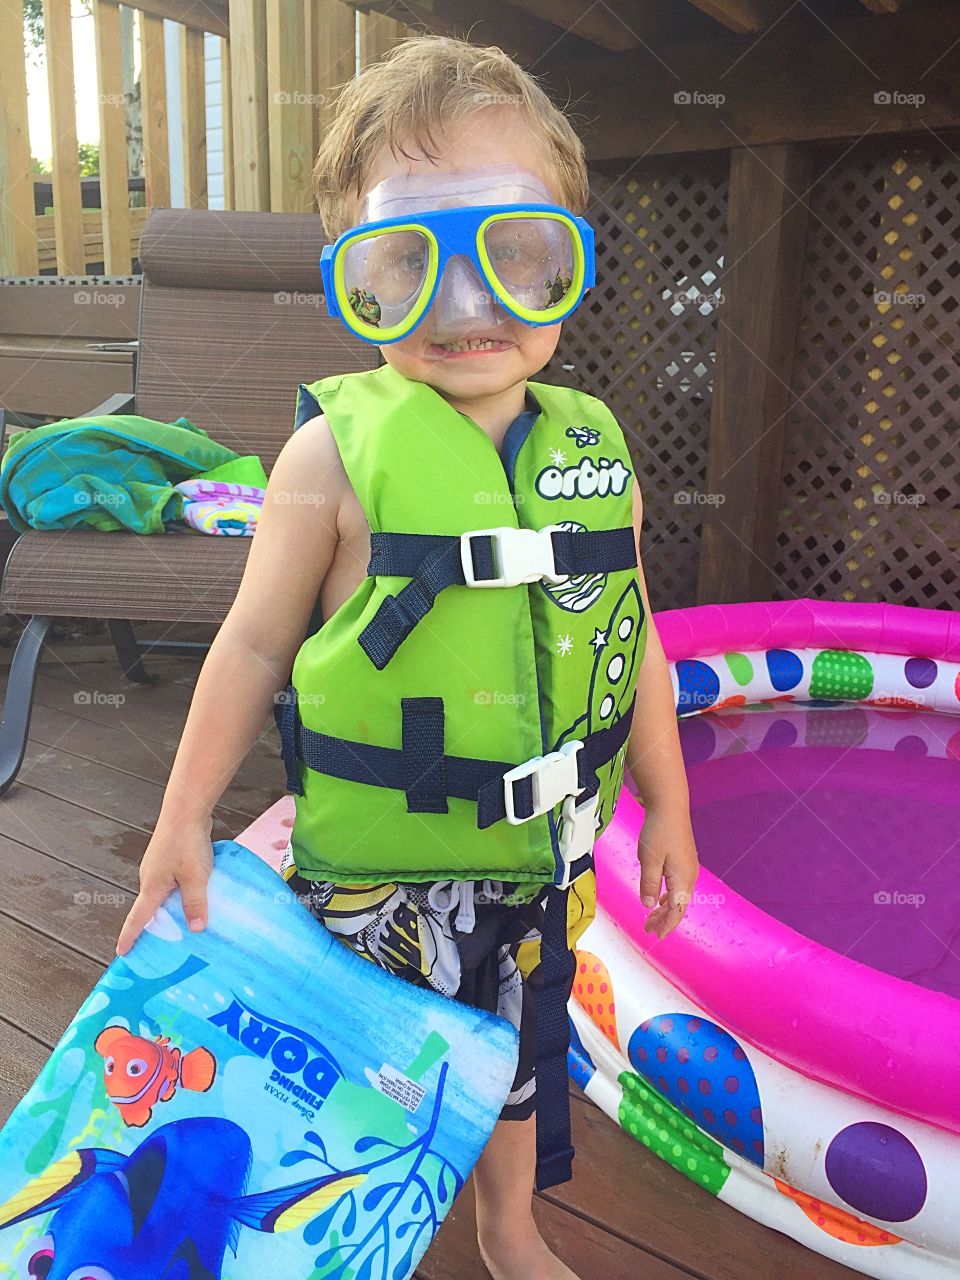 My two-year-old son all suited up and ready for the pool. 